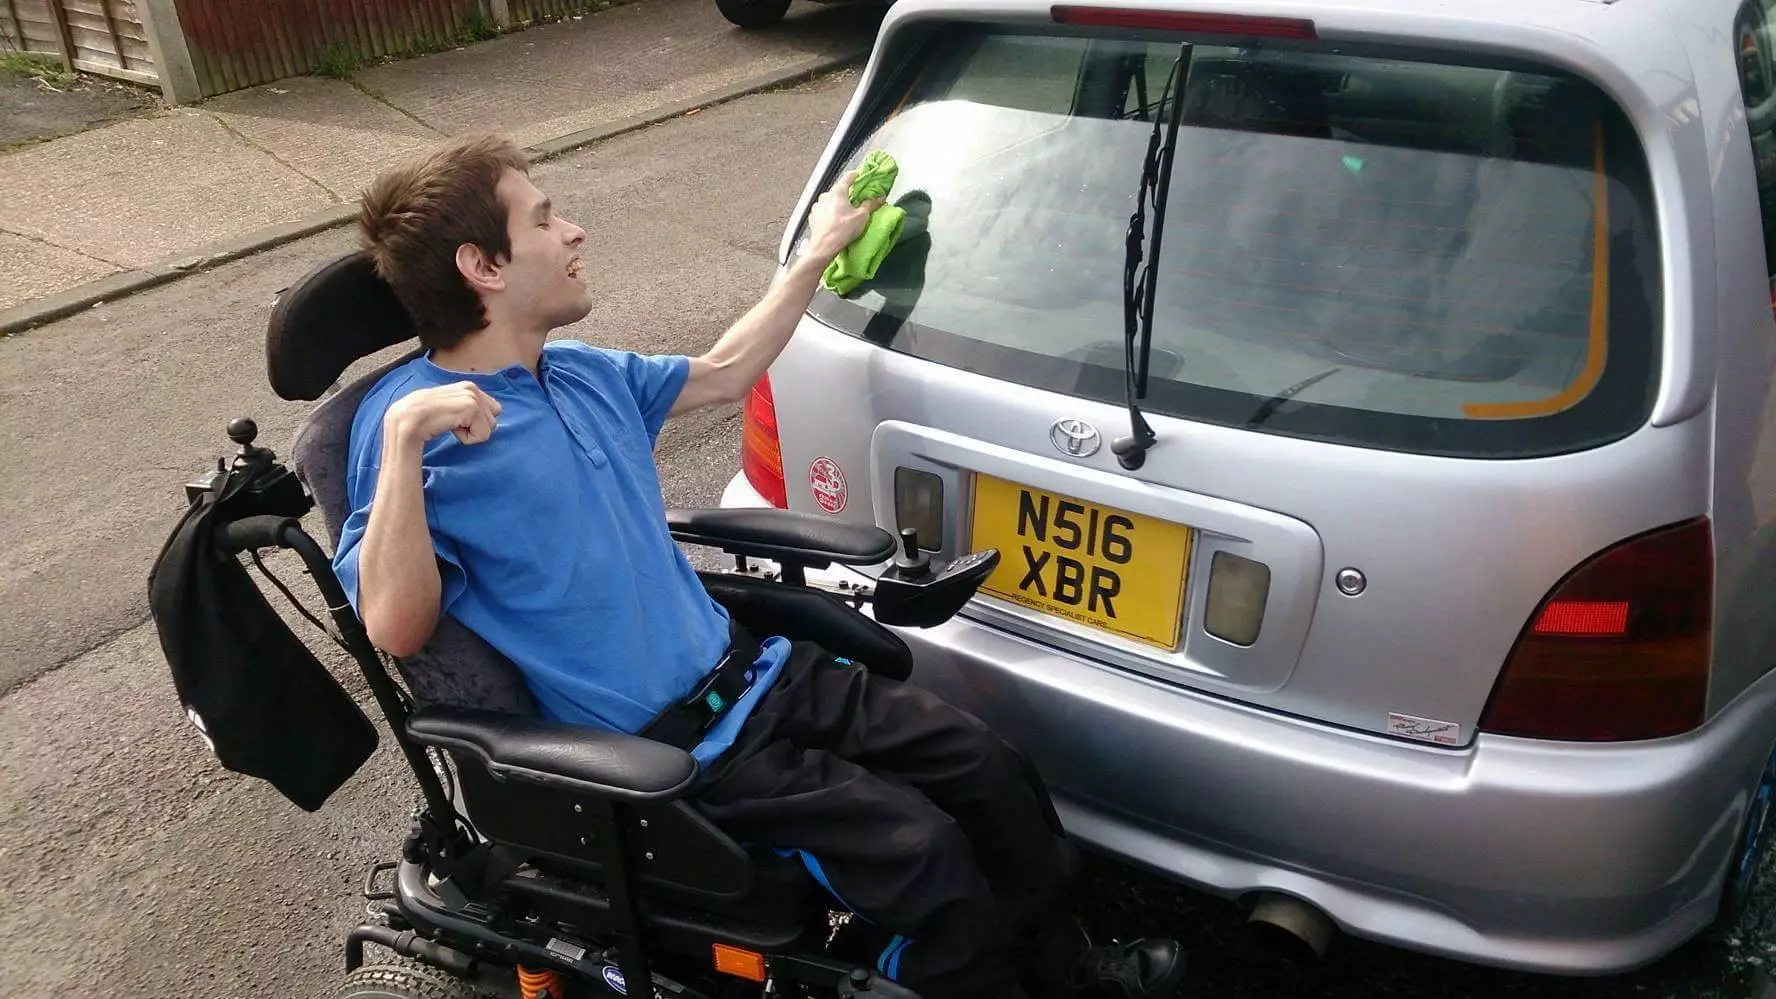 Disabled Lad Goes Viral After Car Cleaning Photos Inspire People Around The World